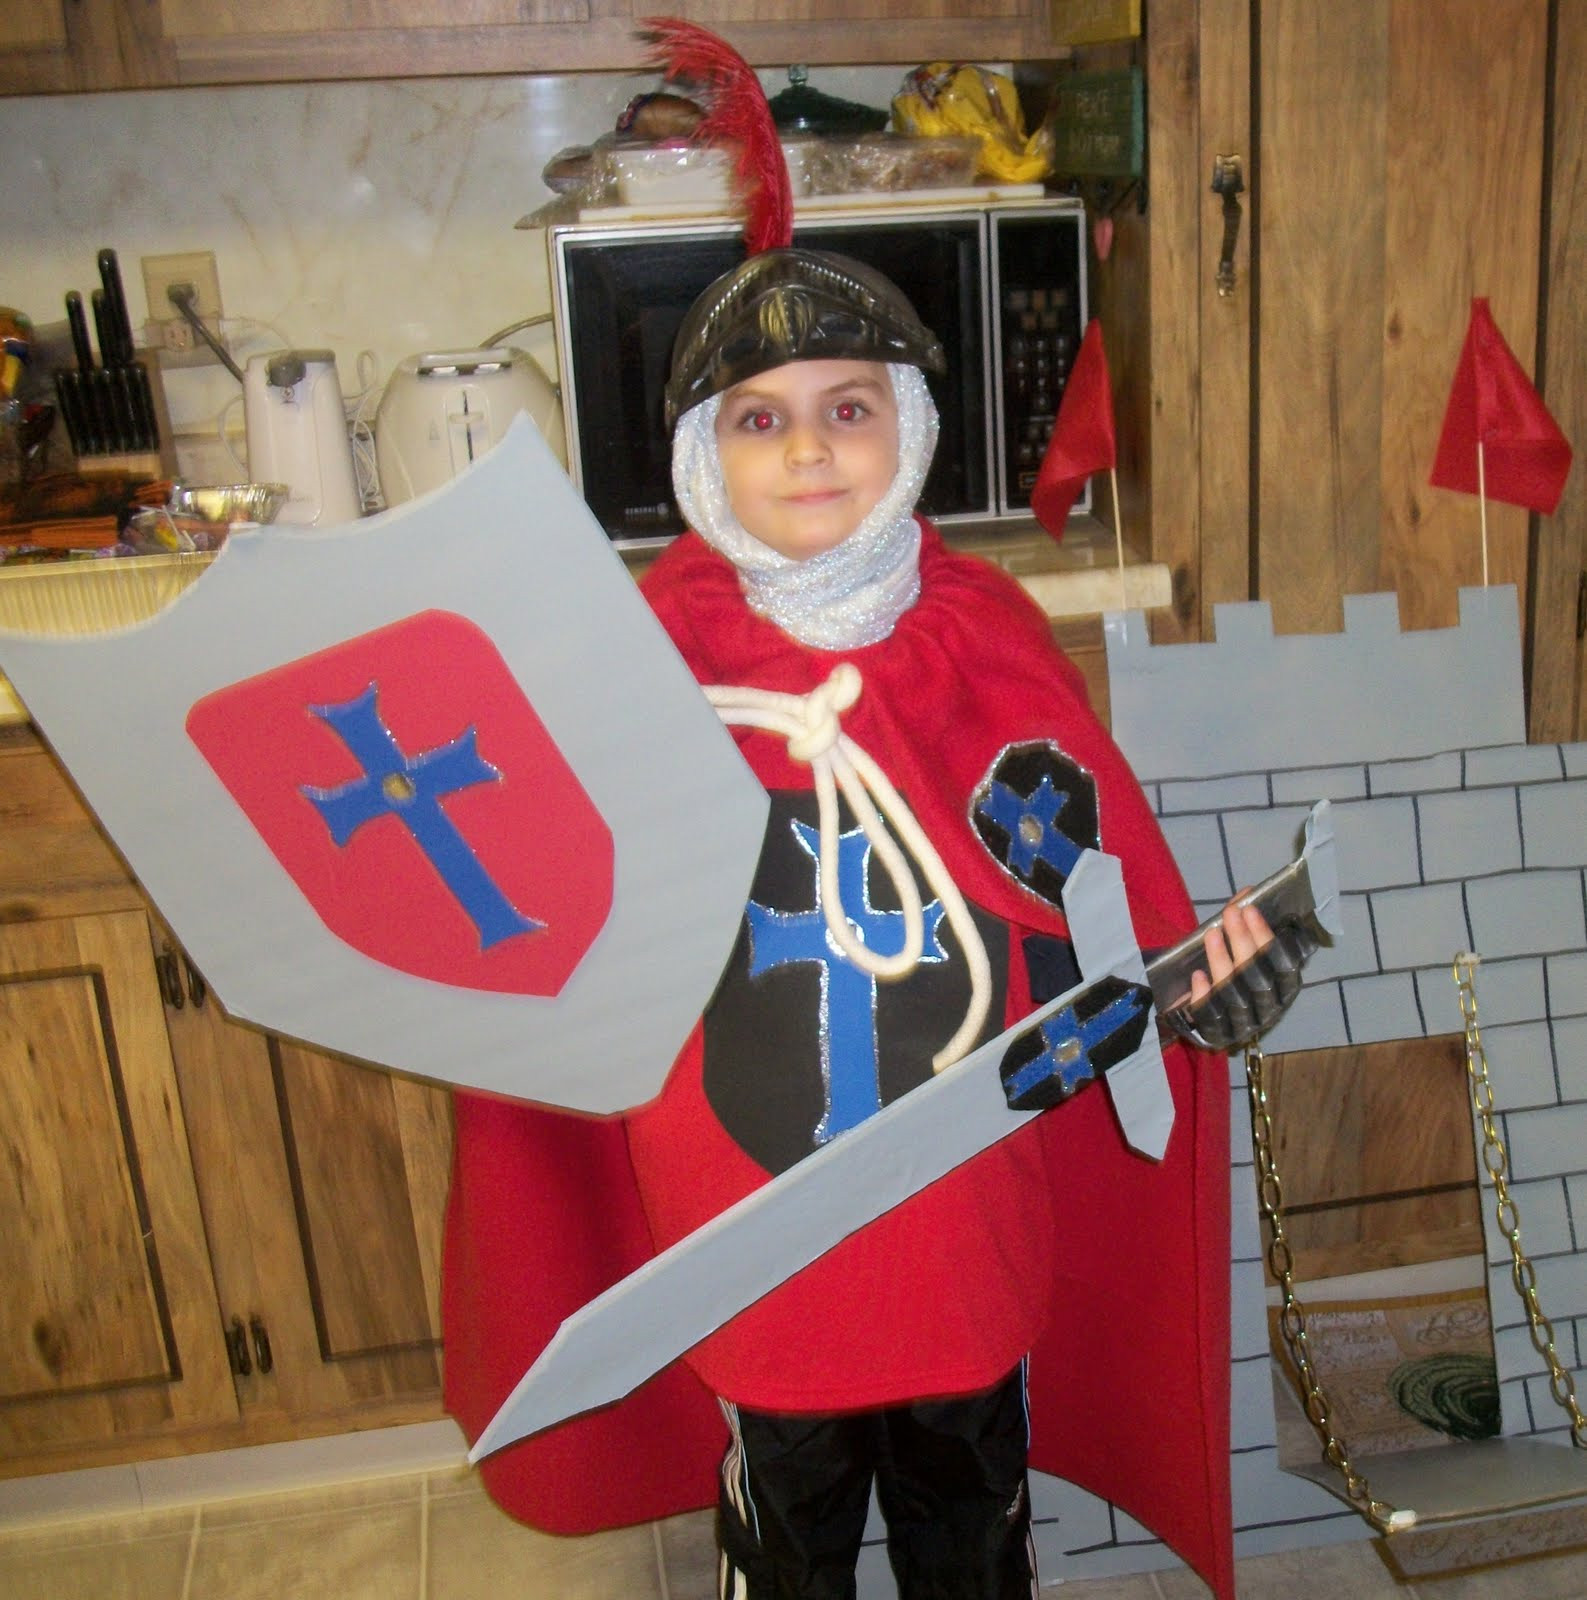 Knight Costume DIY
 Super mom without a cape Homemade No Sew Knight Costume